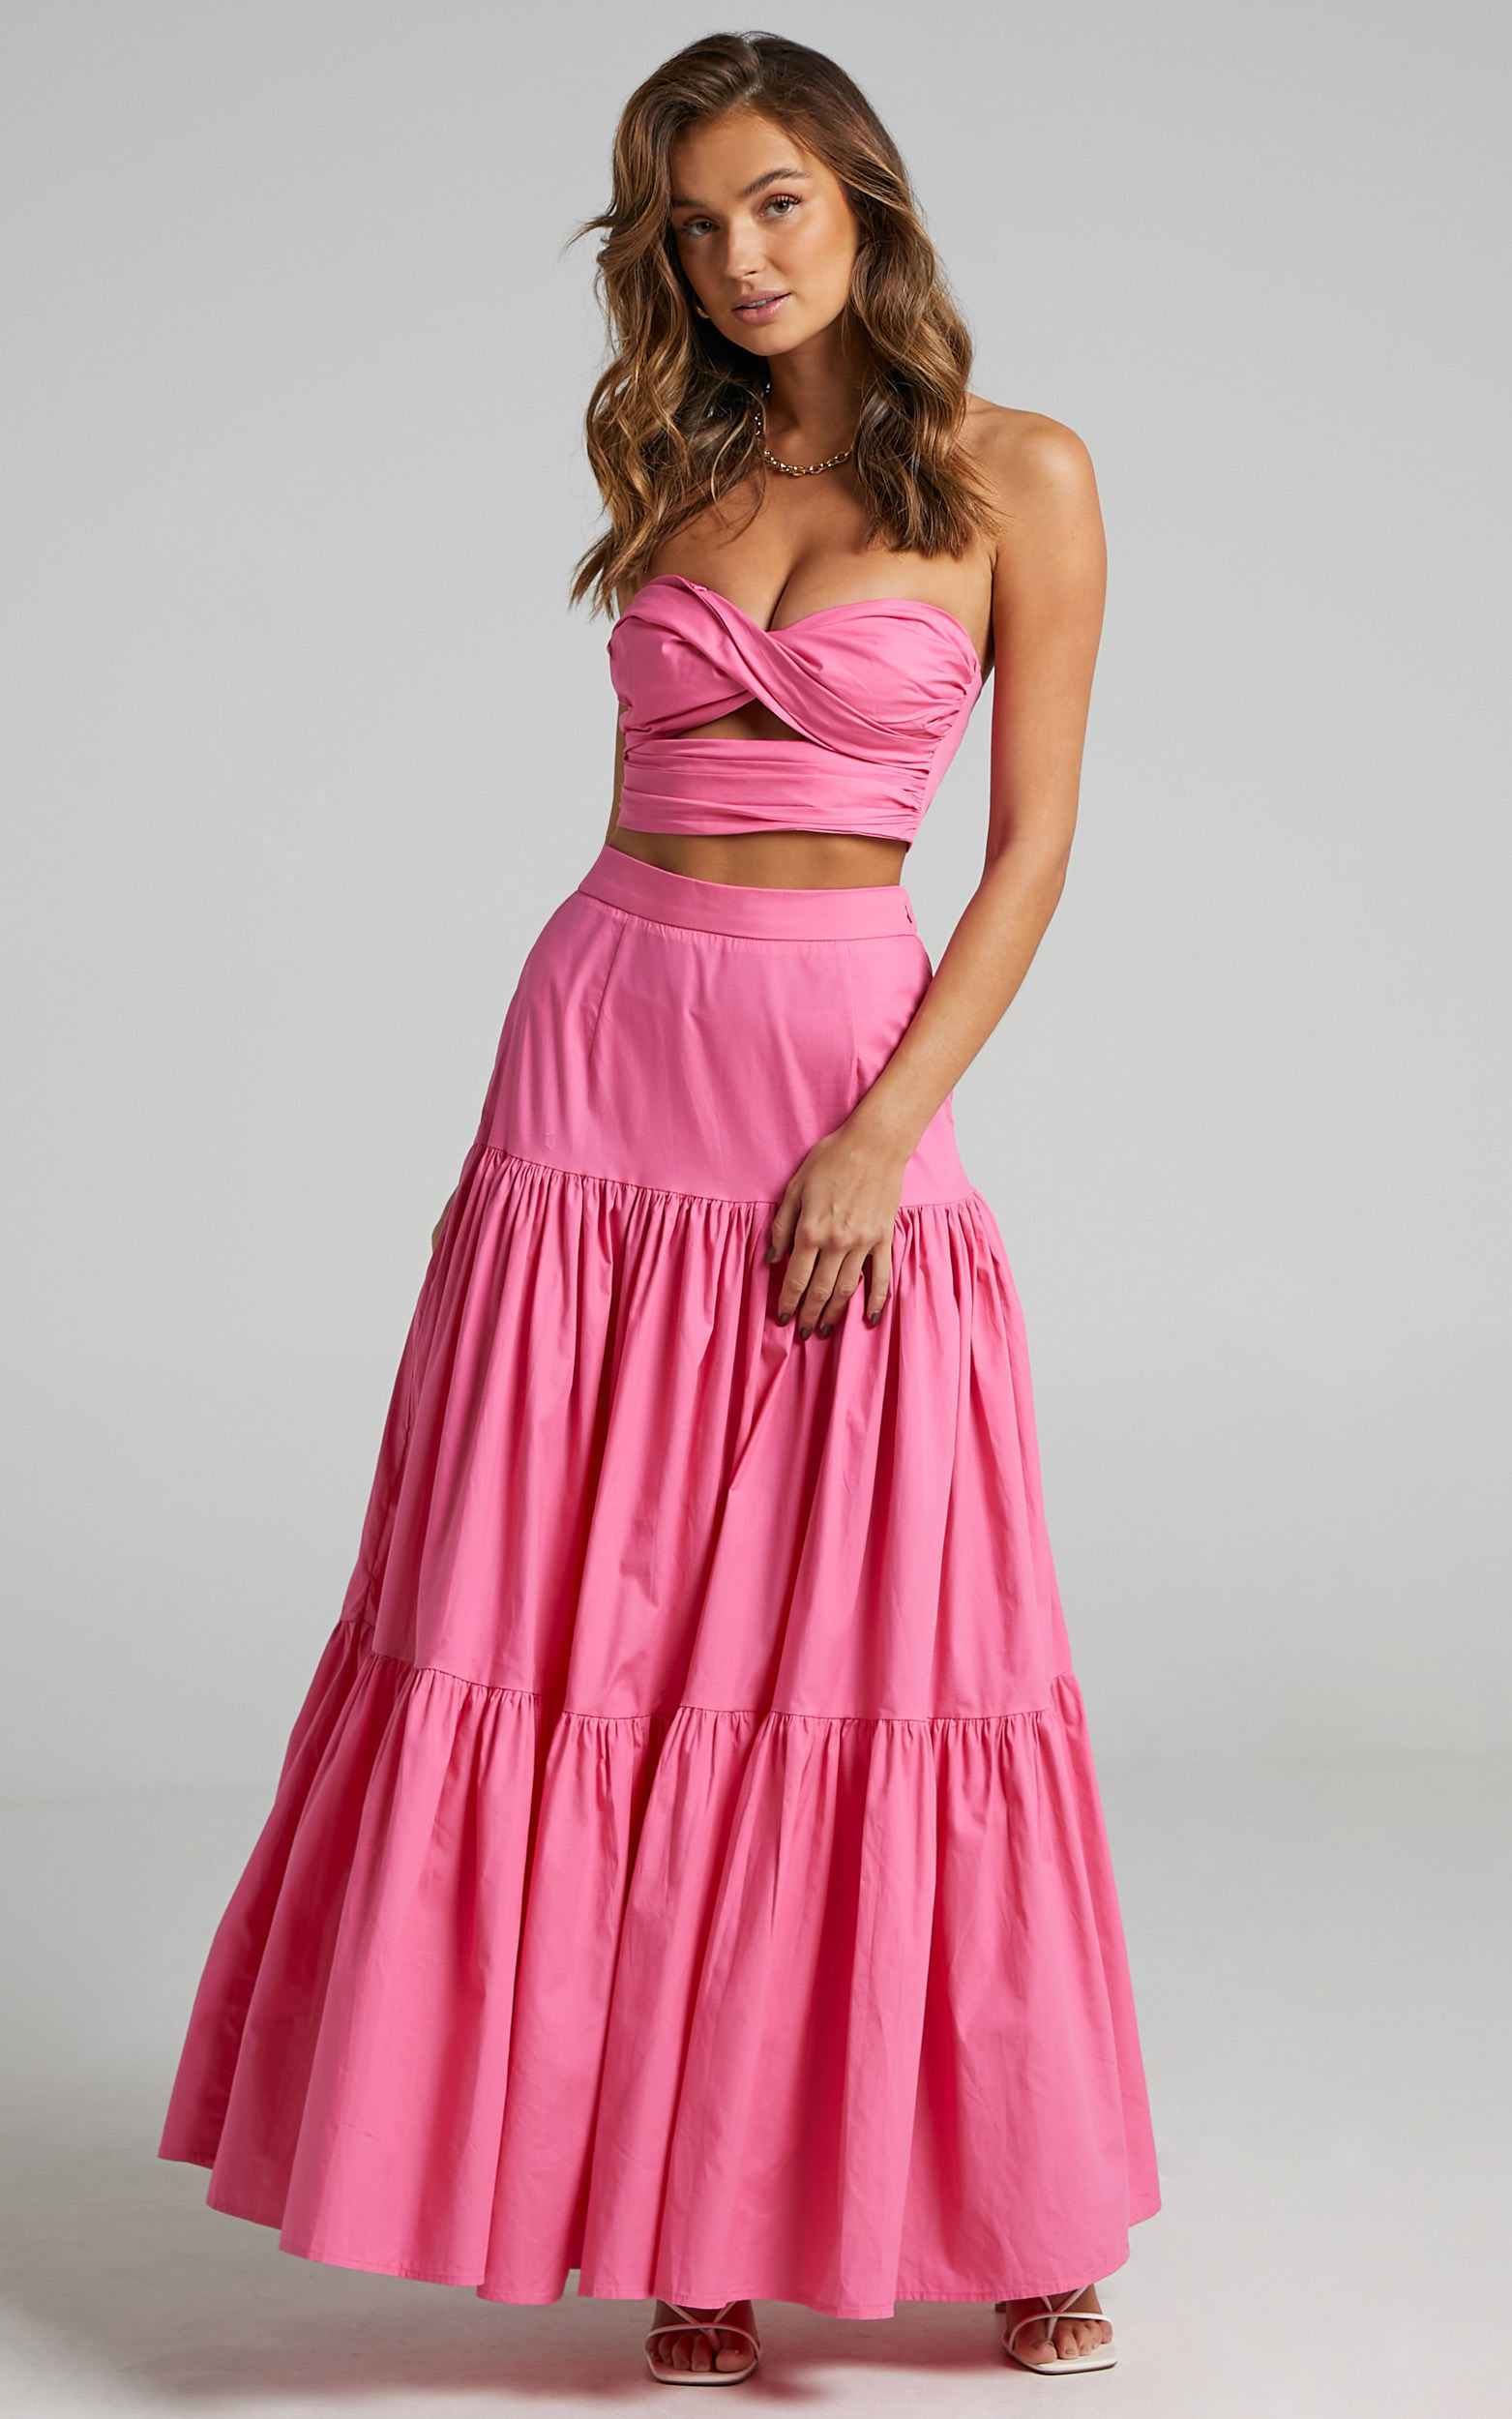 Runaway The Label - Ayla Maxi Skirt in Pink - L, PNK2, hi-res image number null